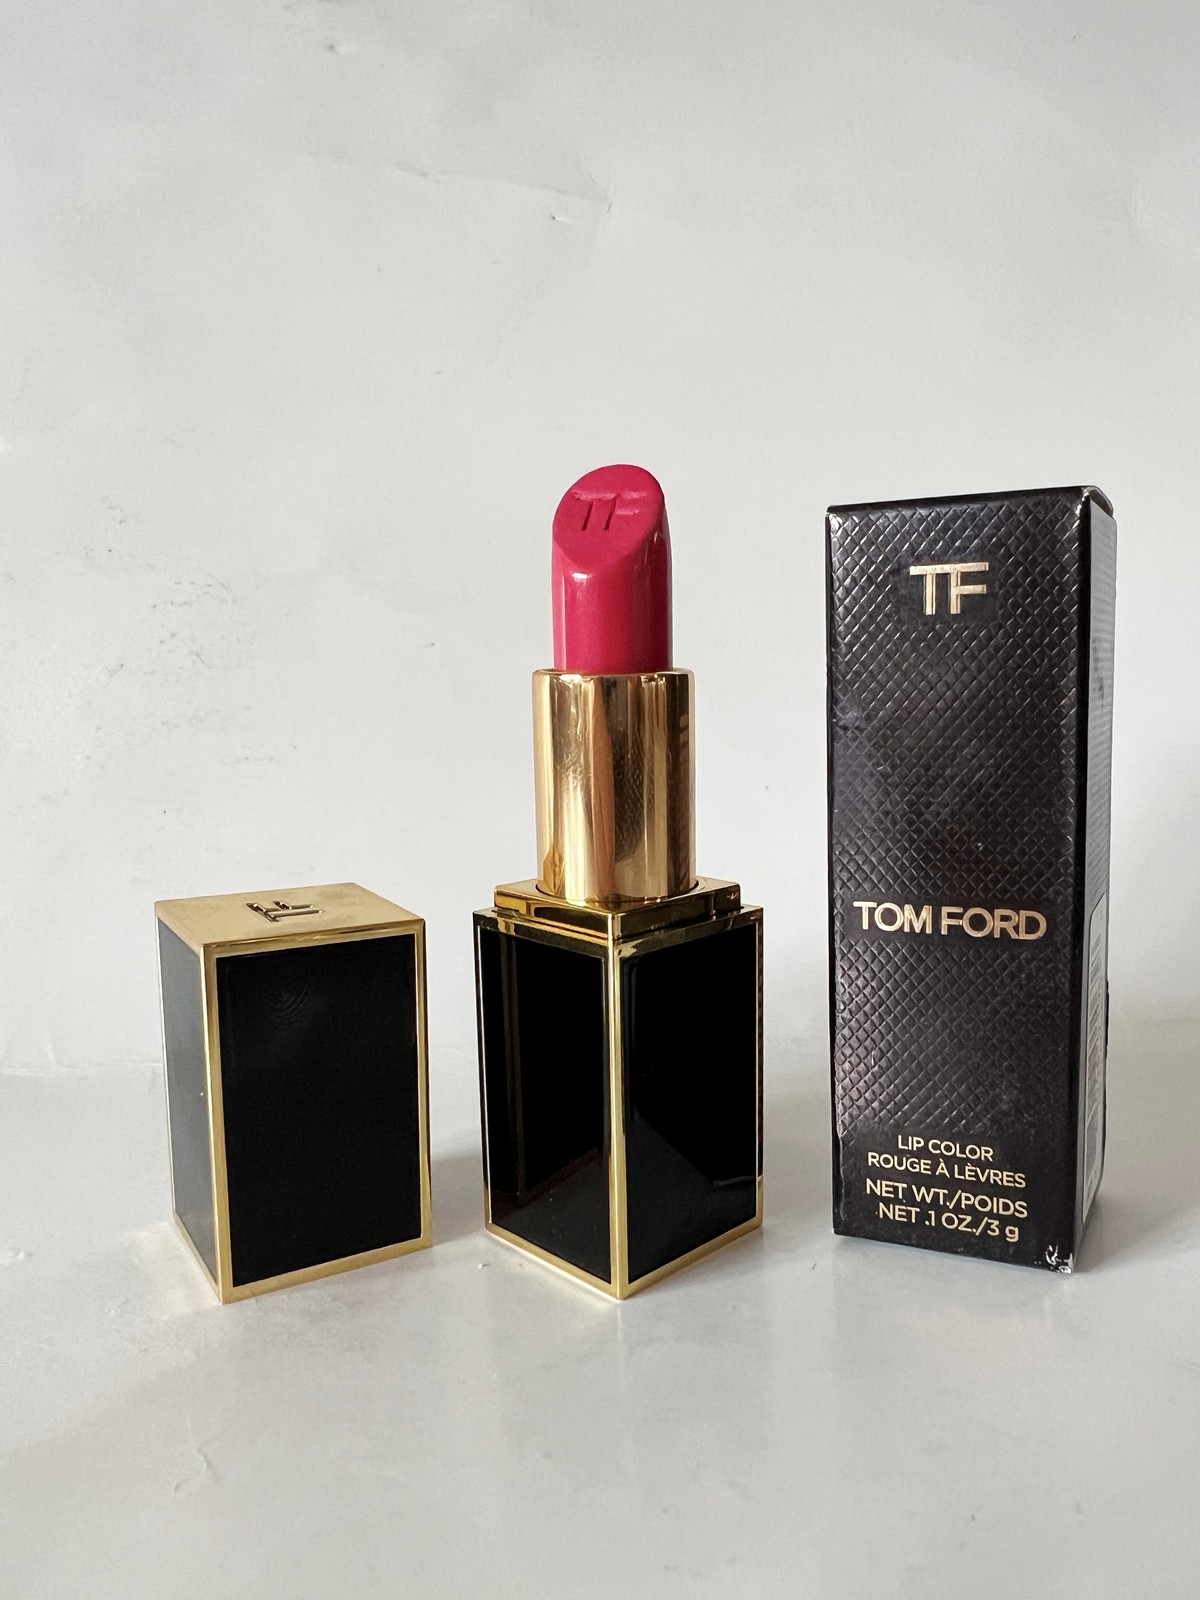 Primary image for Tom Ford Lip Color Shade "08 flamingo' 0.1oz/3g Boxed